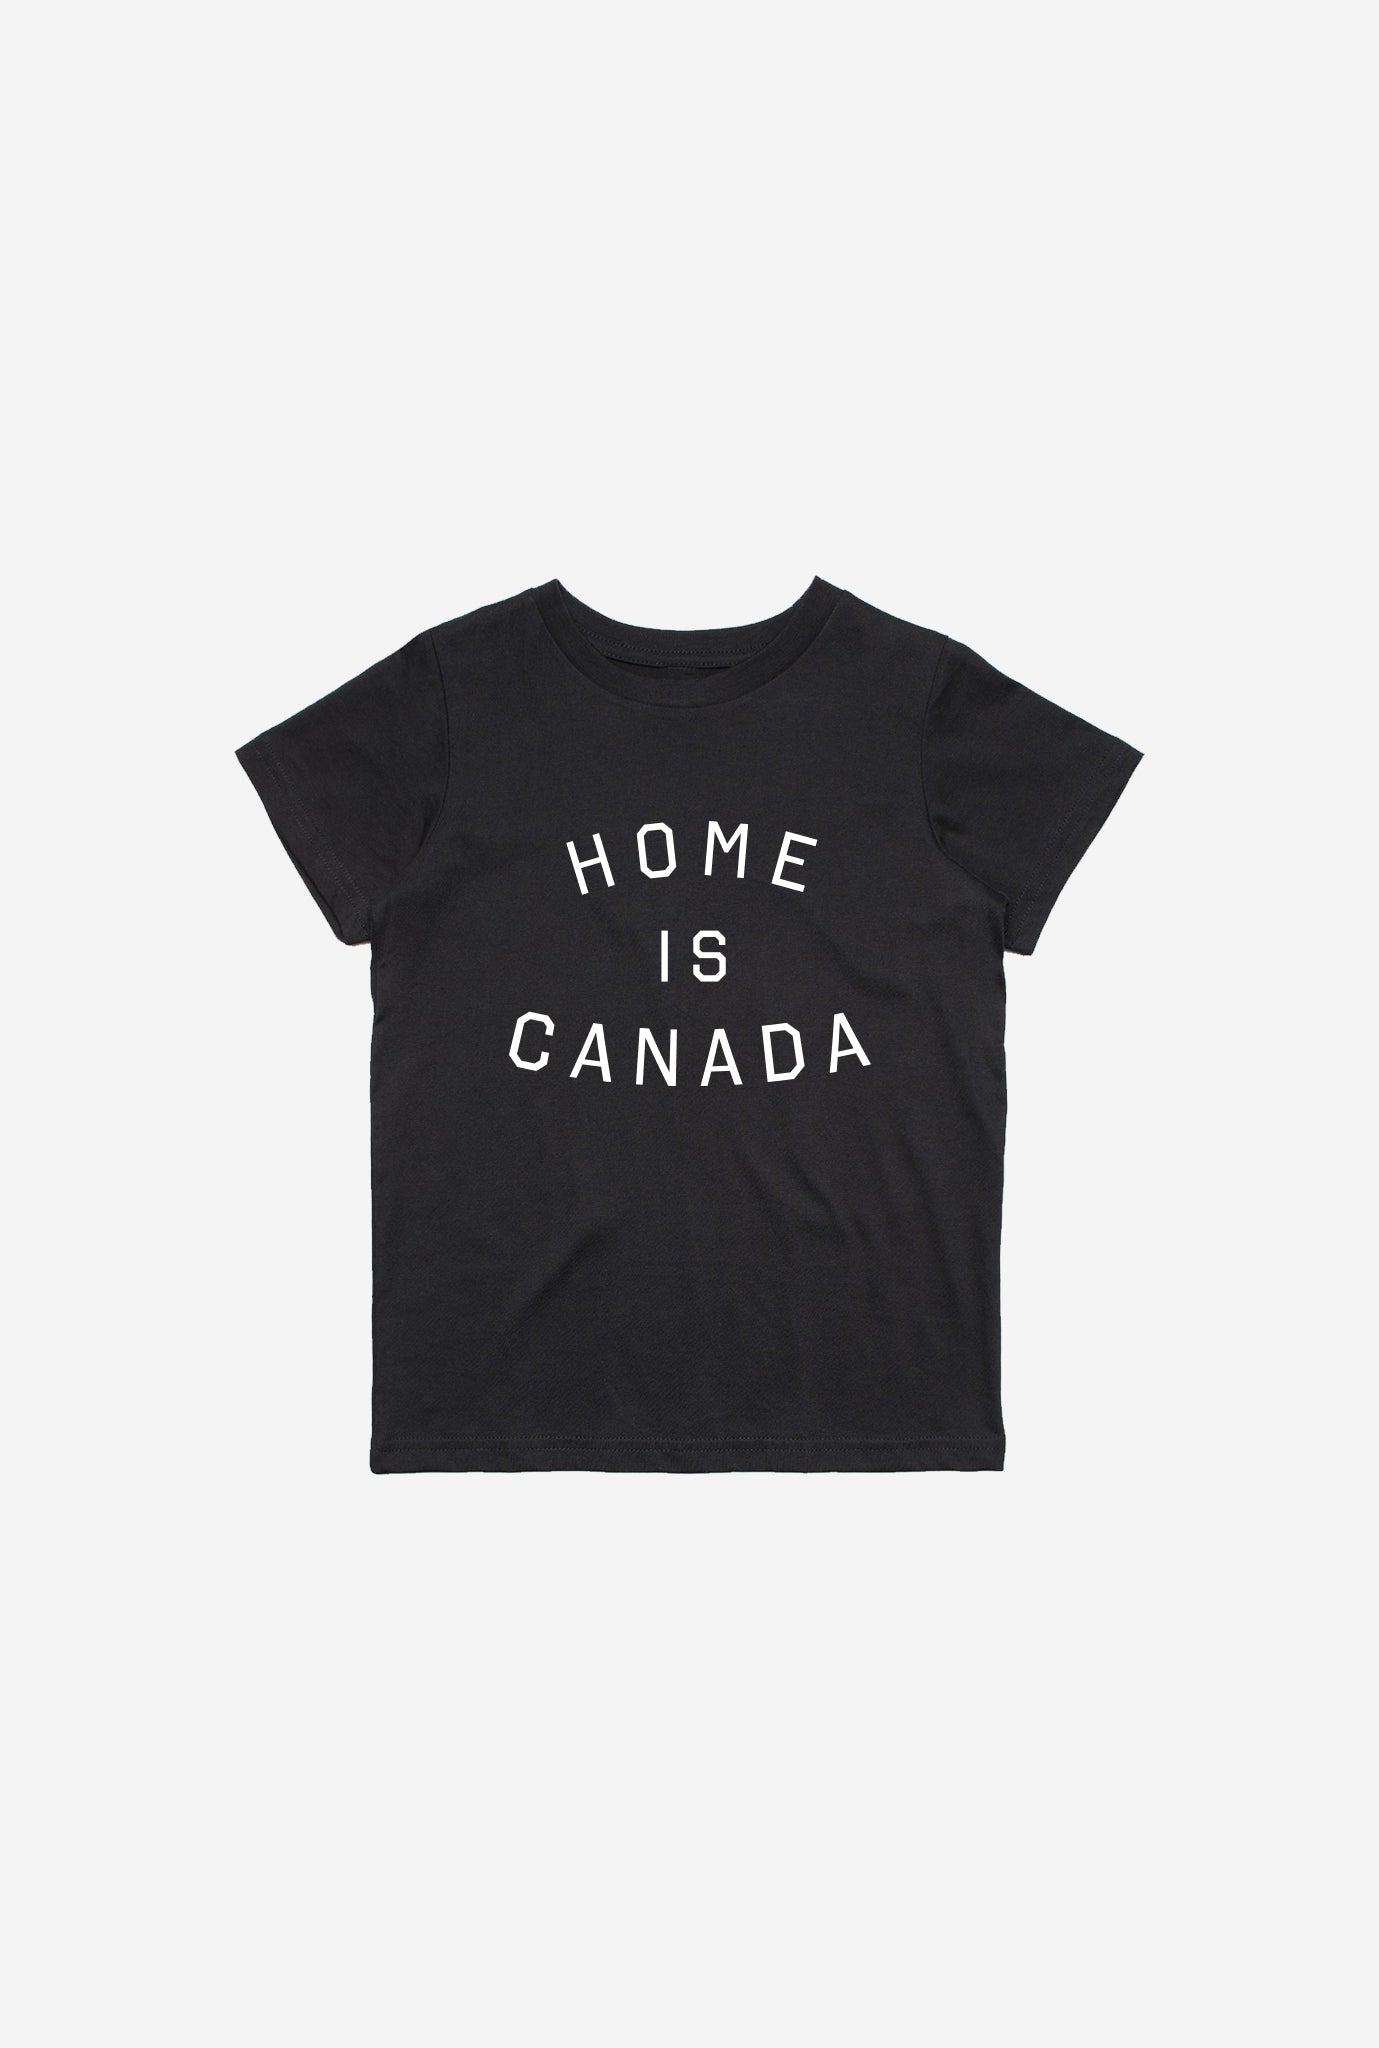 Home is Canada Kids T-Shirt - Black